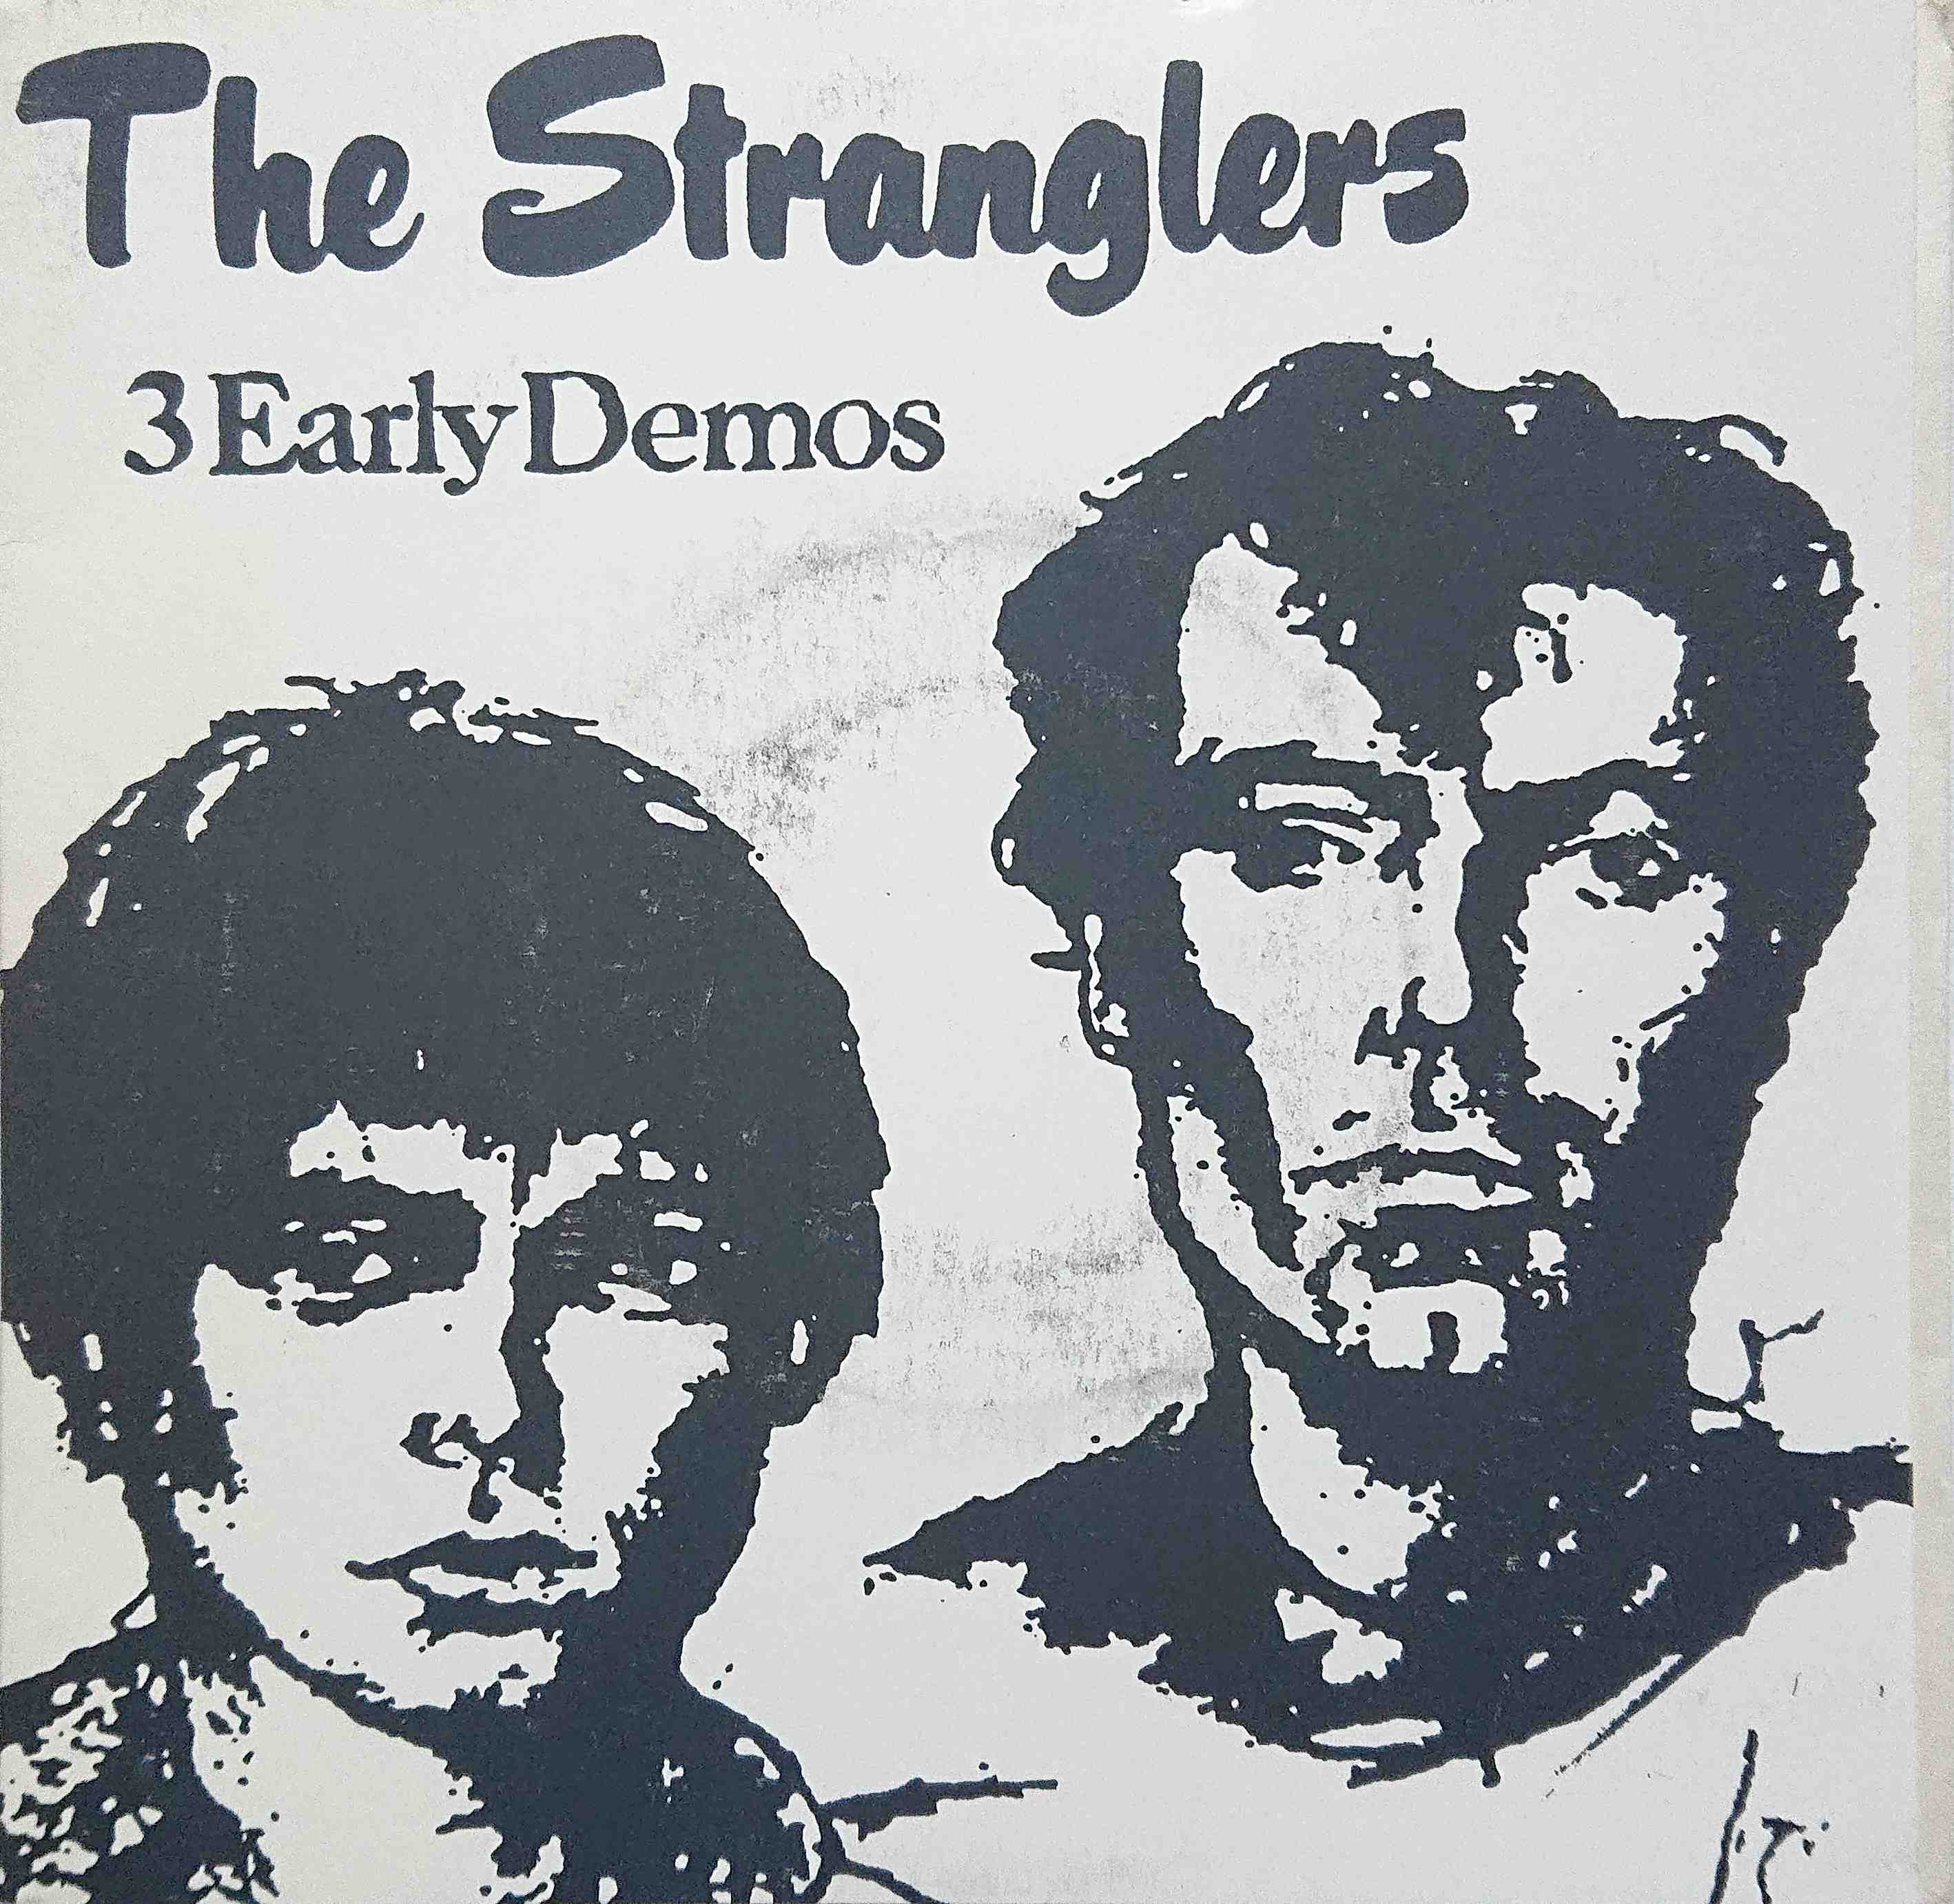 Picture of 3 early demos by artist The Stranglers from The Stranglers singles